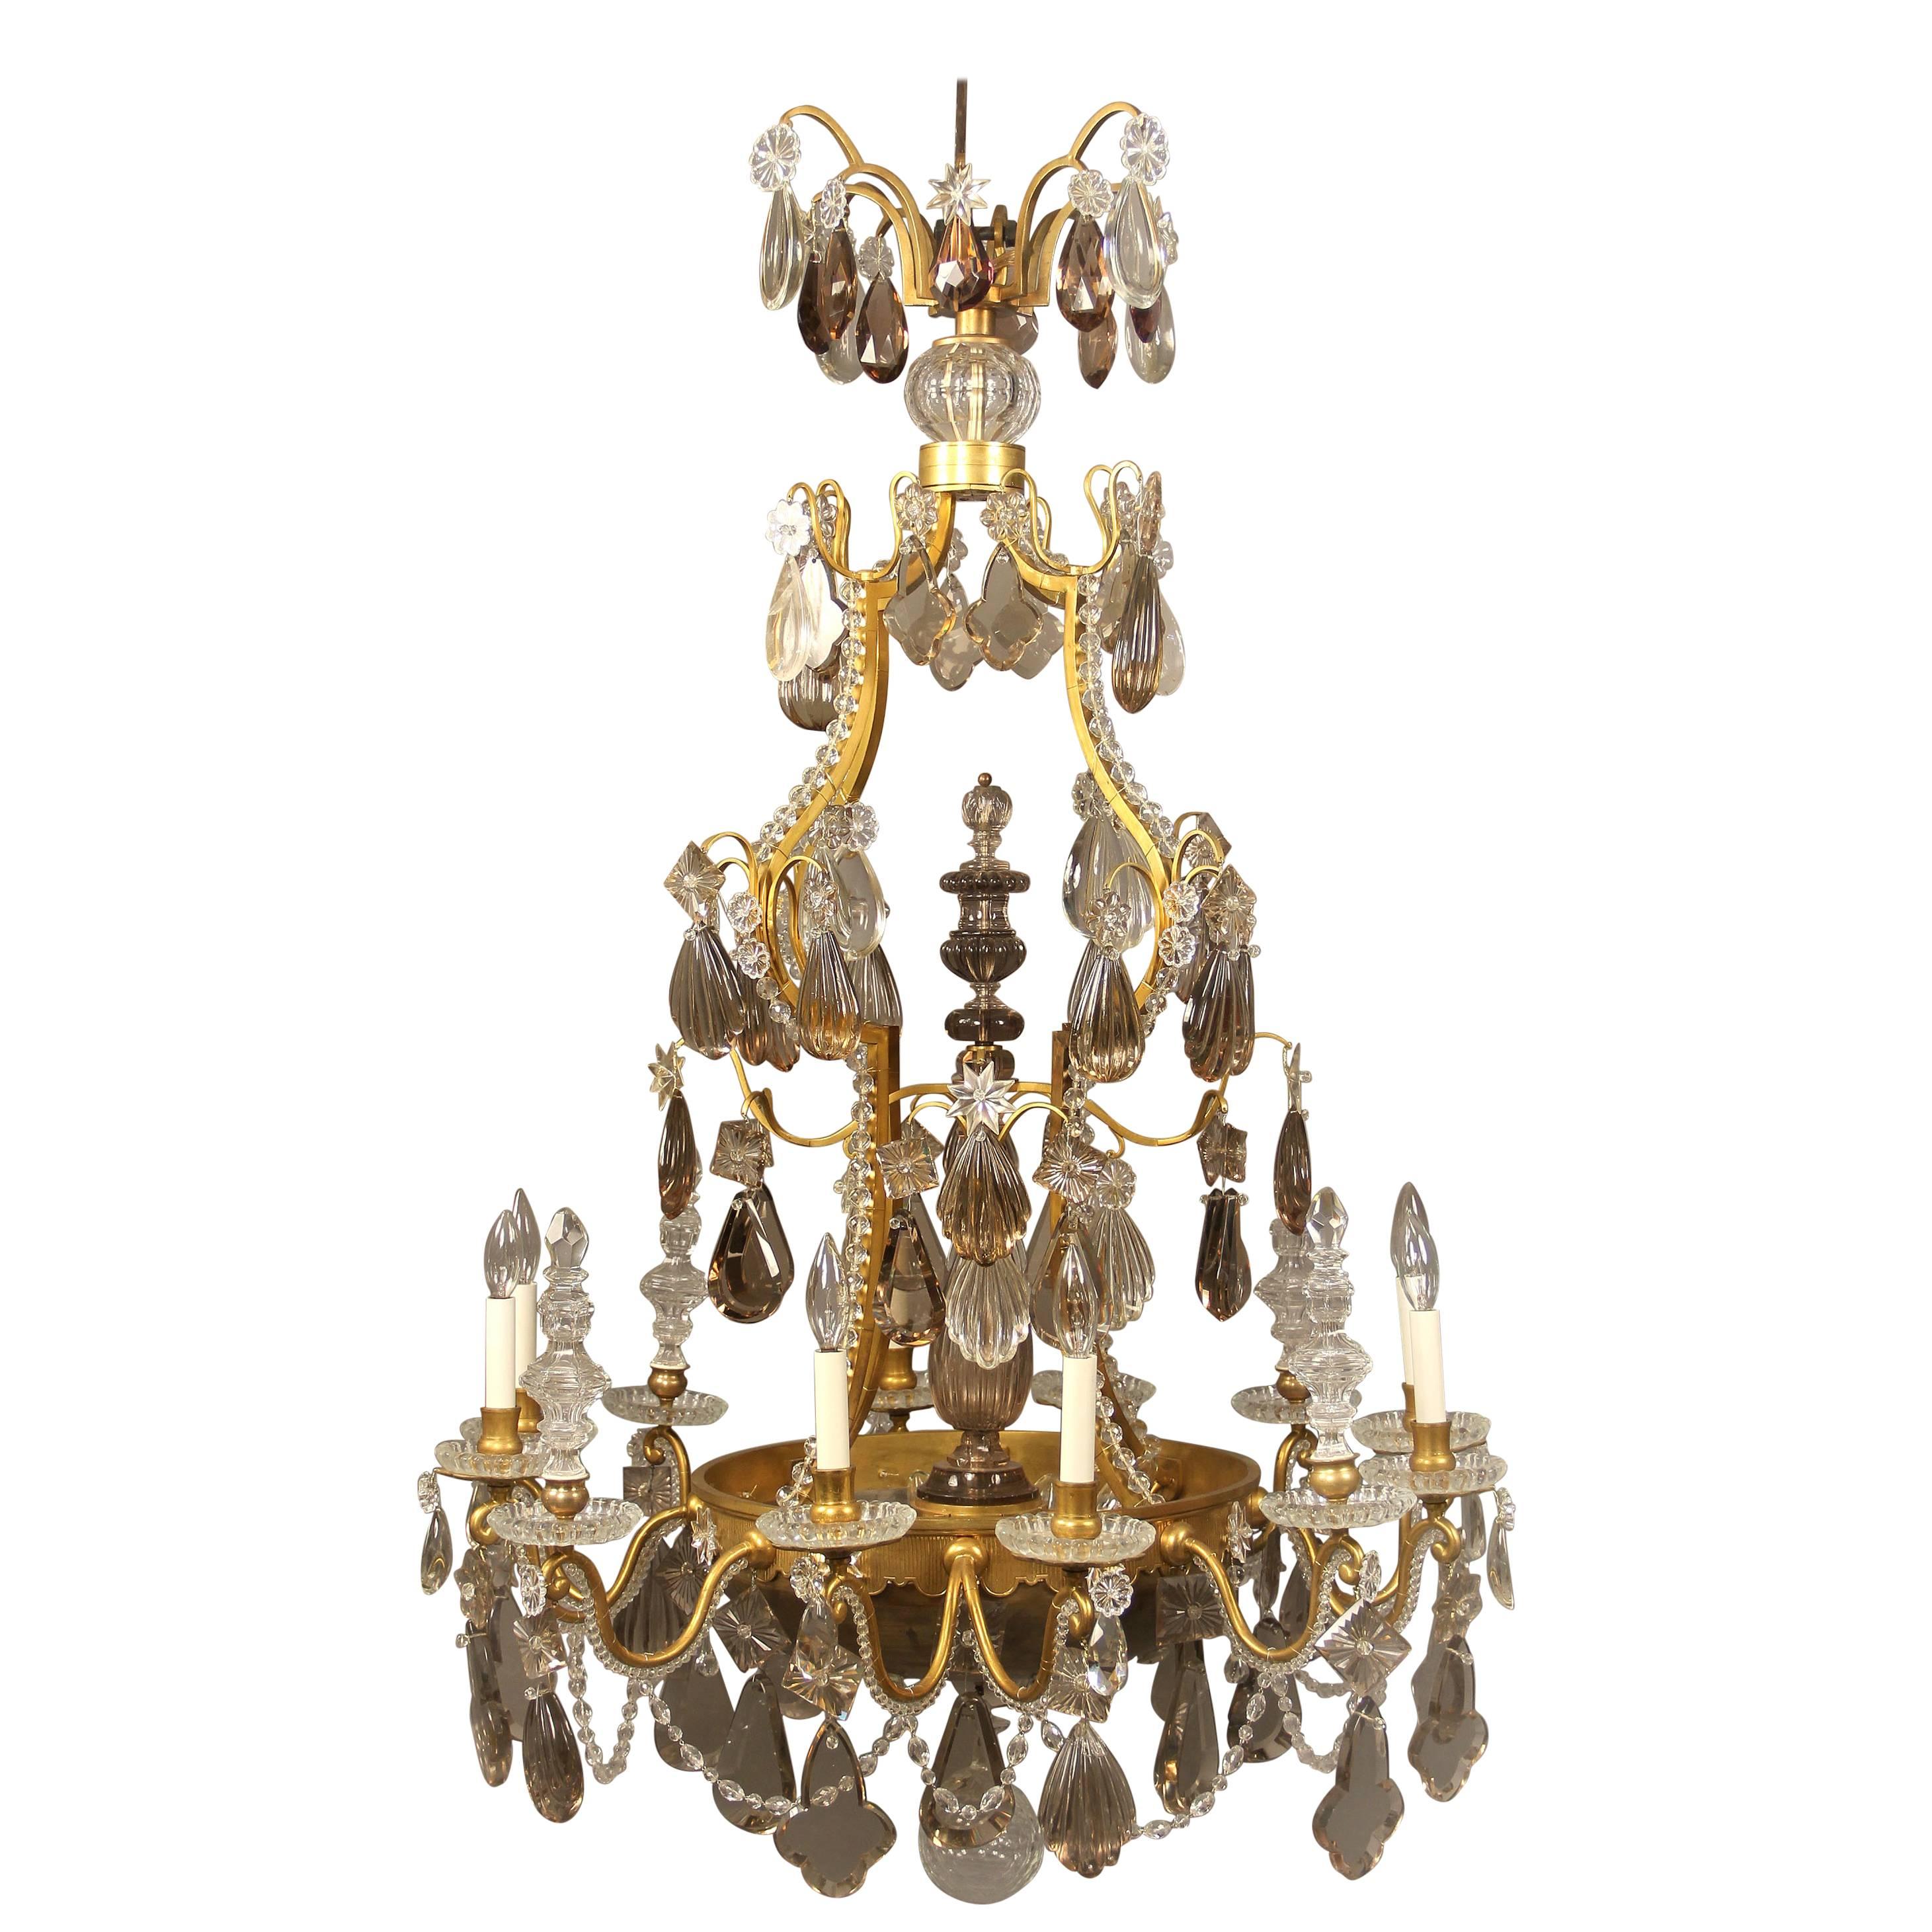 Late 19th-Early 20th Century Gilt Bronze and Baccarat Crystal Chandelier